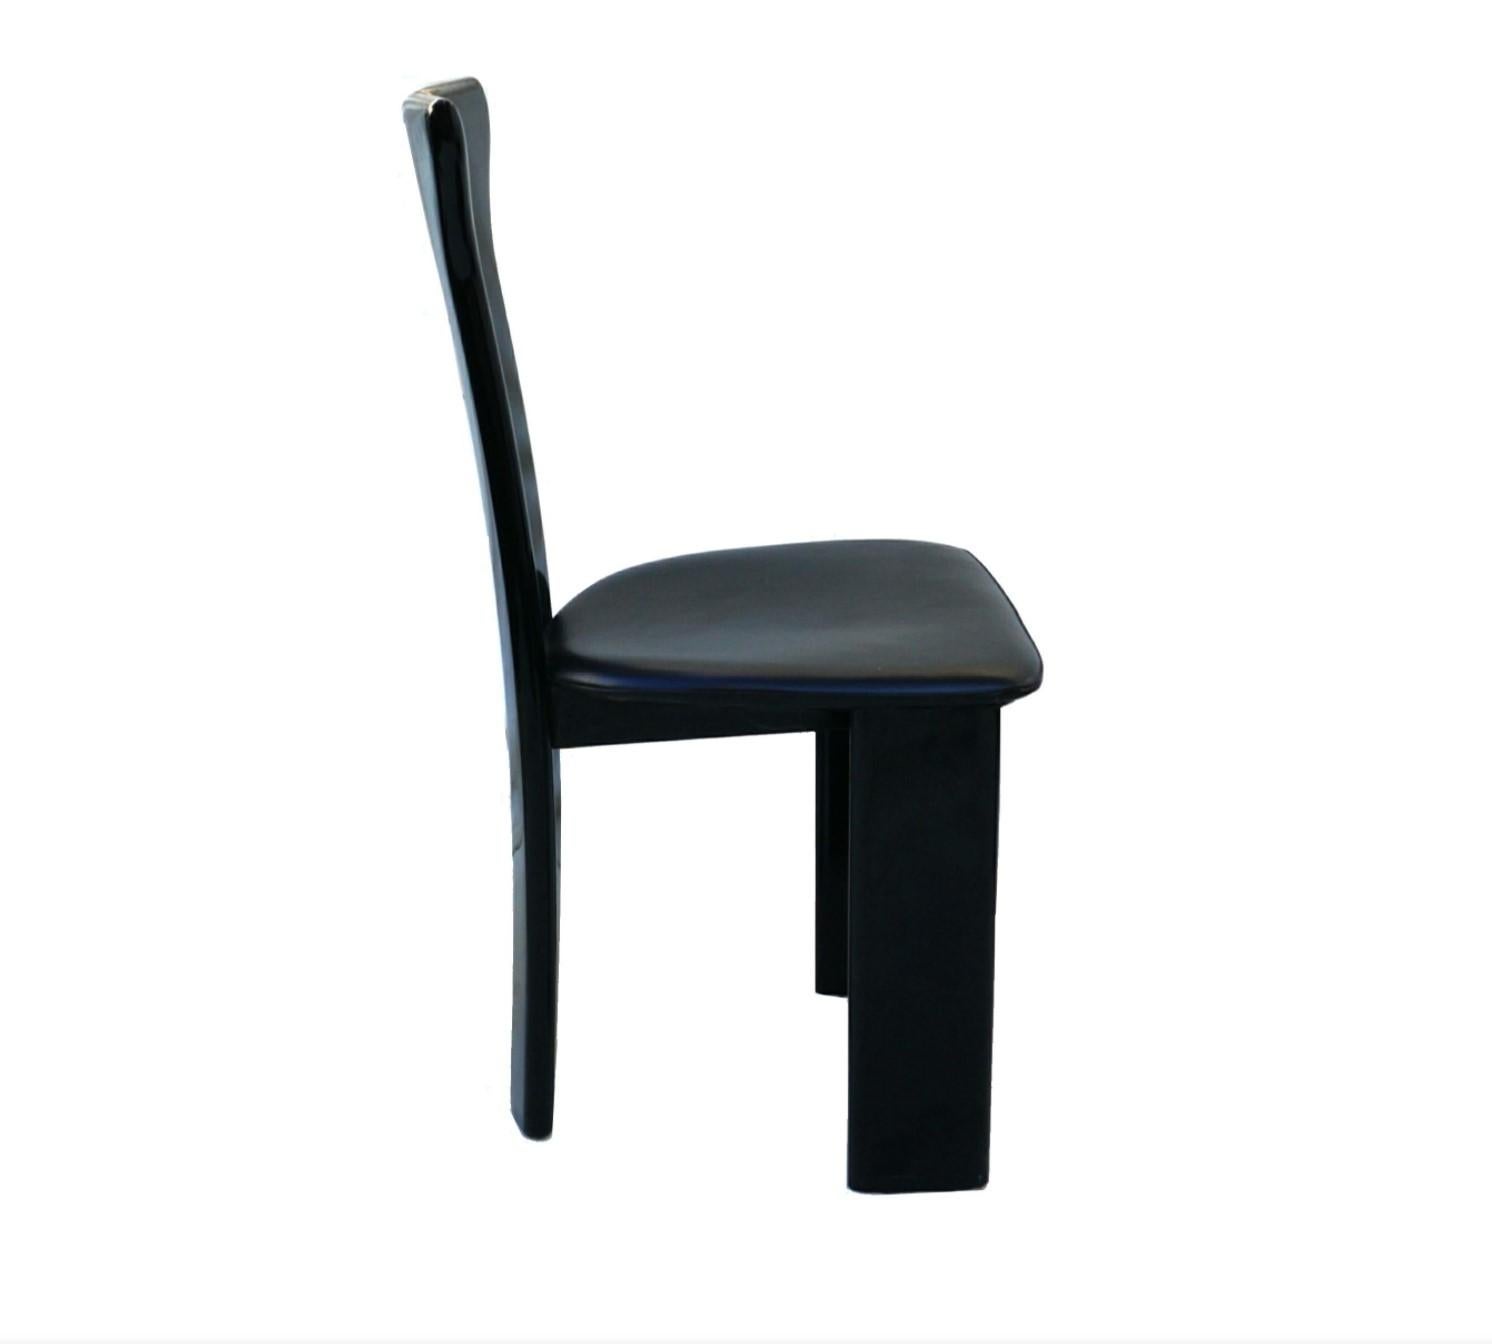 6 Pierre Cardin Roche Bobois Italian Black Lacquer Dining Room Conference Chairs In Good Condition For Sale In Wayne, NJ